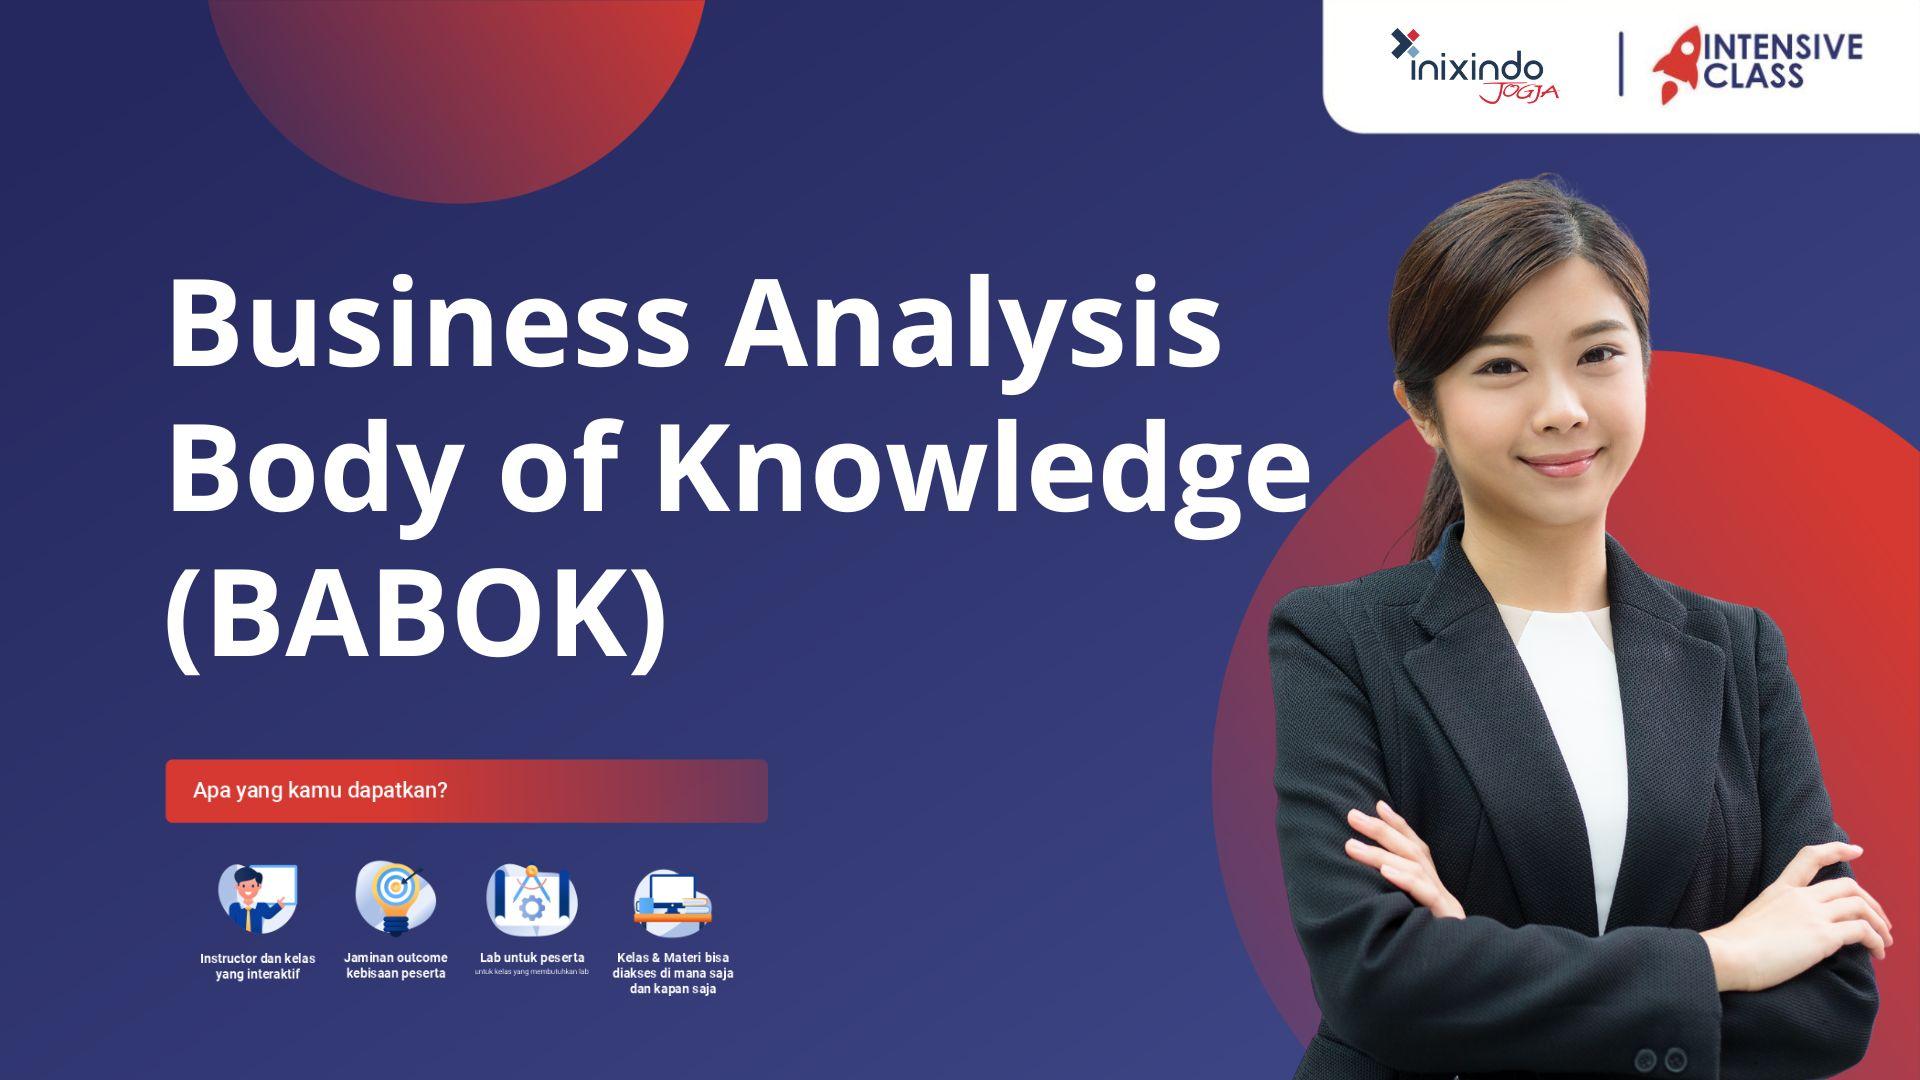 Business Analysis Body of Knowledge (BABOK) 16